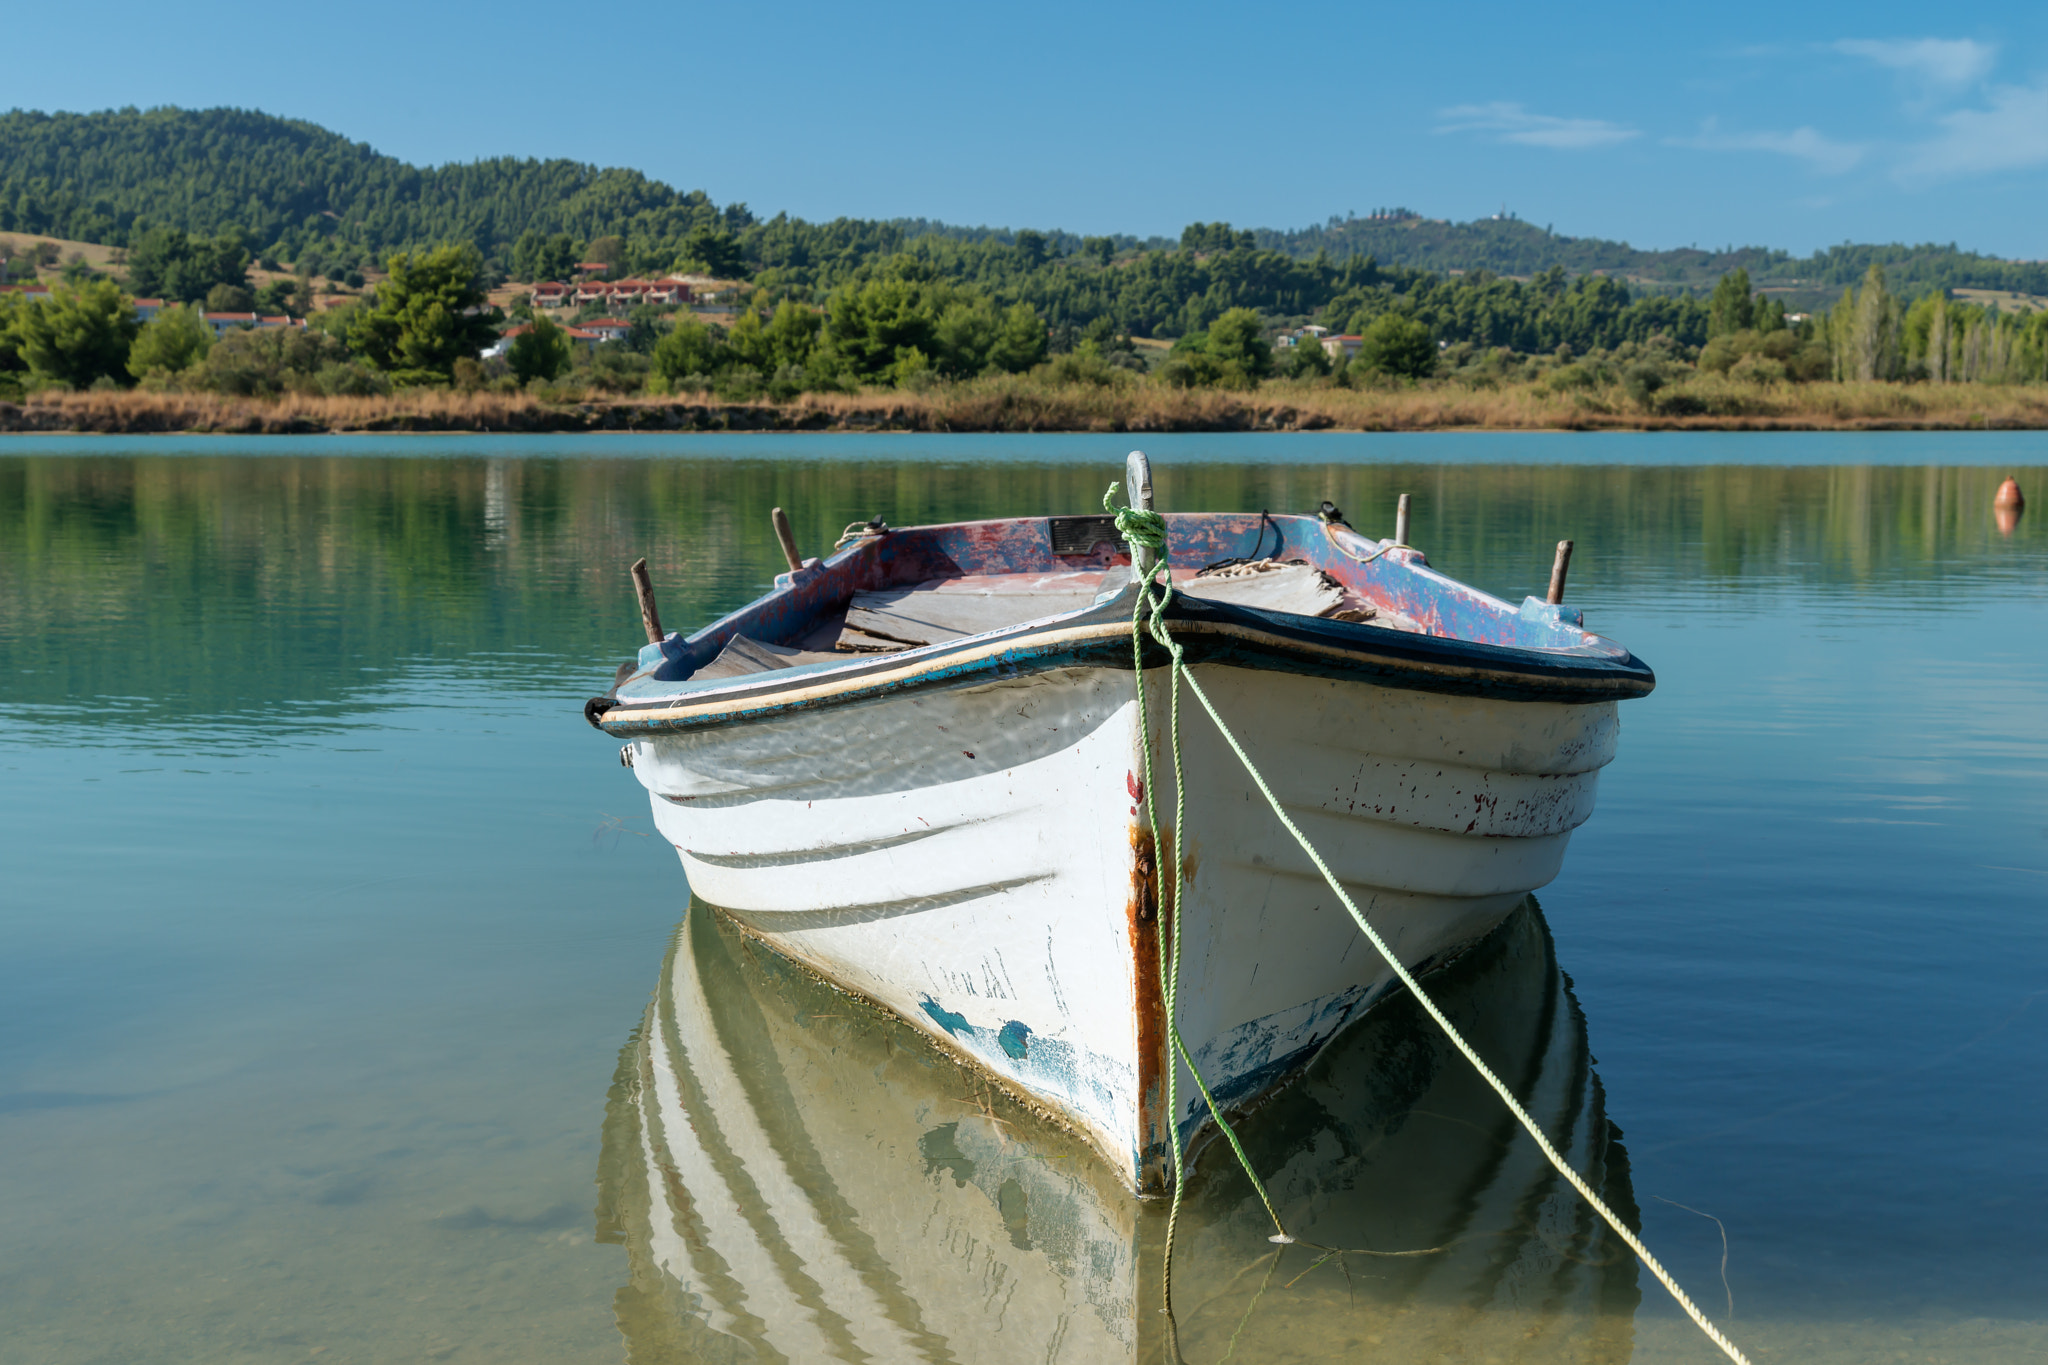 Nikon D800 + Tamron AF 28-75mm F2.8 XR Di LD Aspherical (IF) sample photo. Old fishing boat on the lake photography